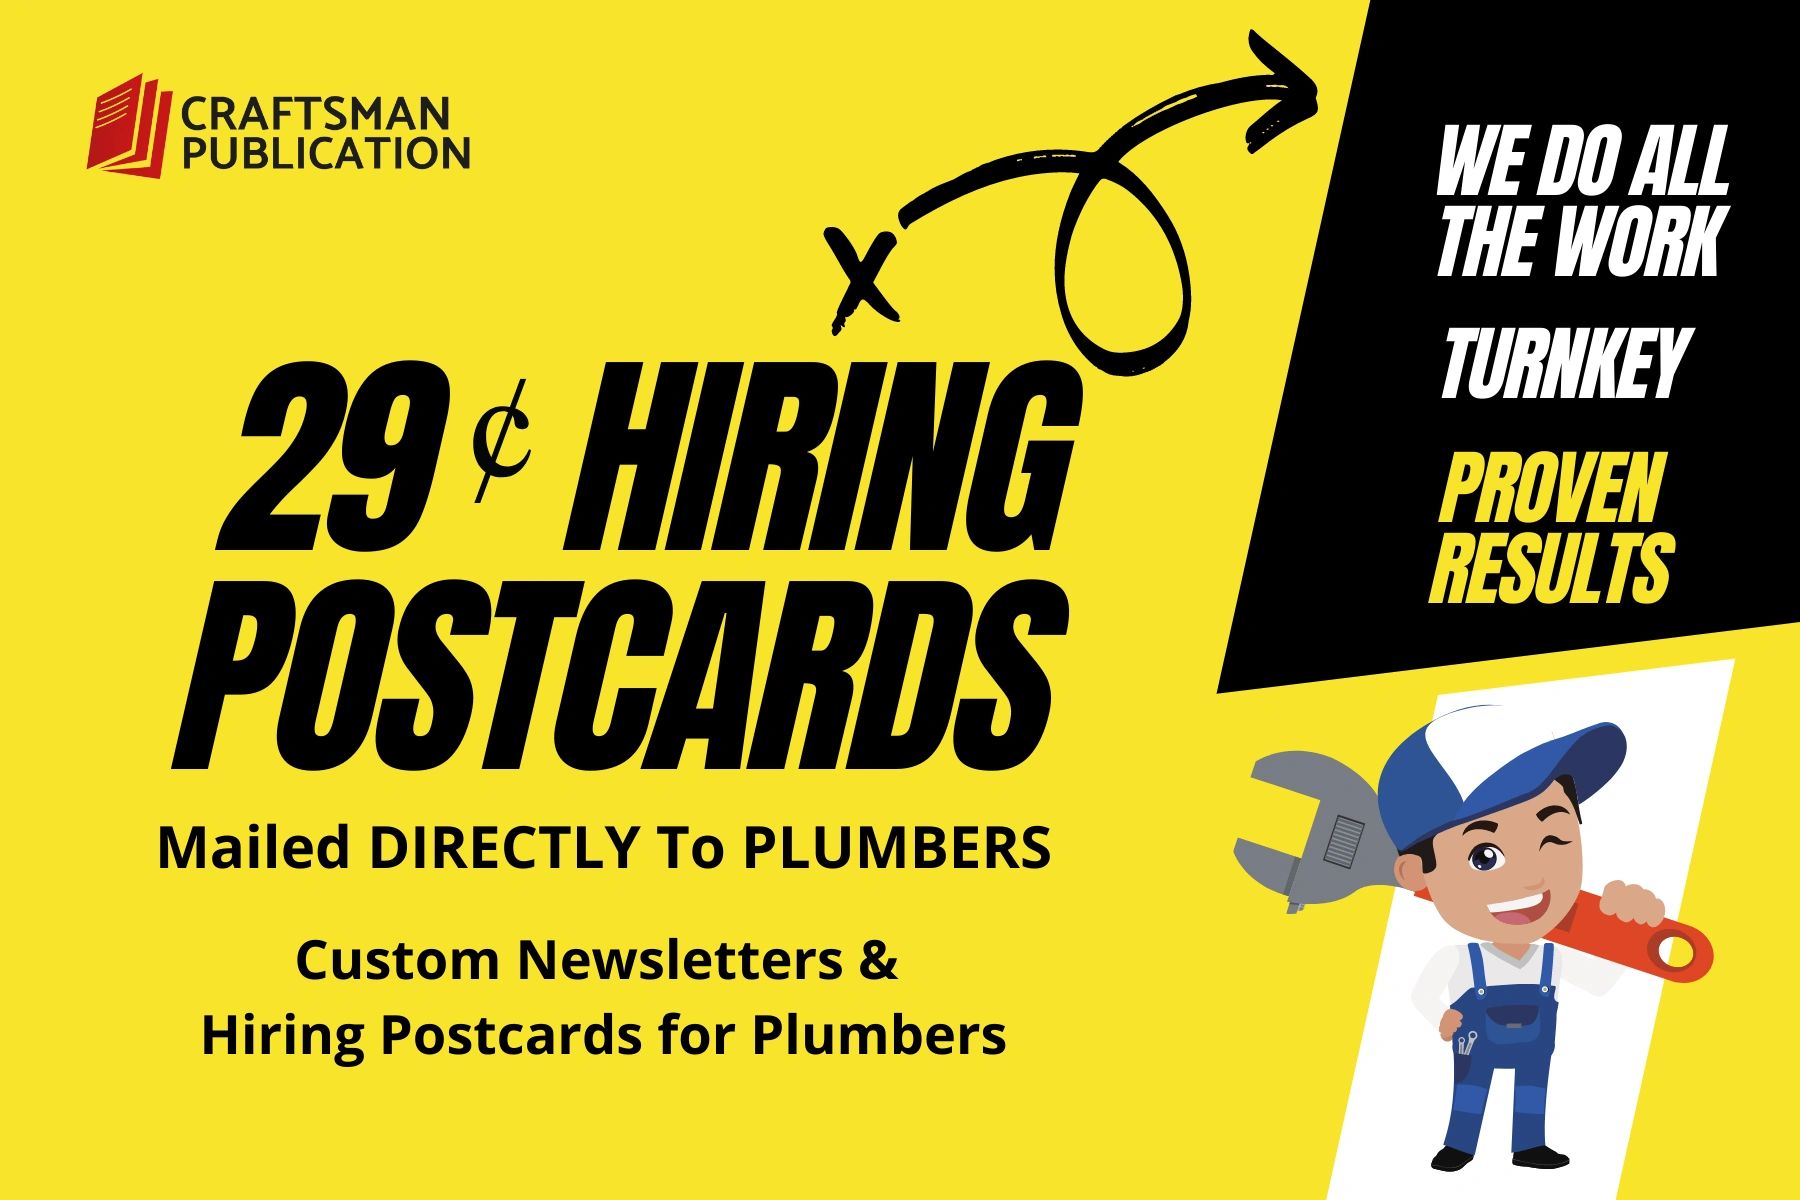 Craftsman Publication we create hiring post cards for plubmers.